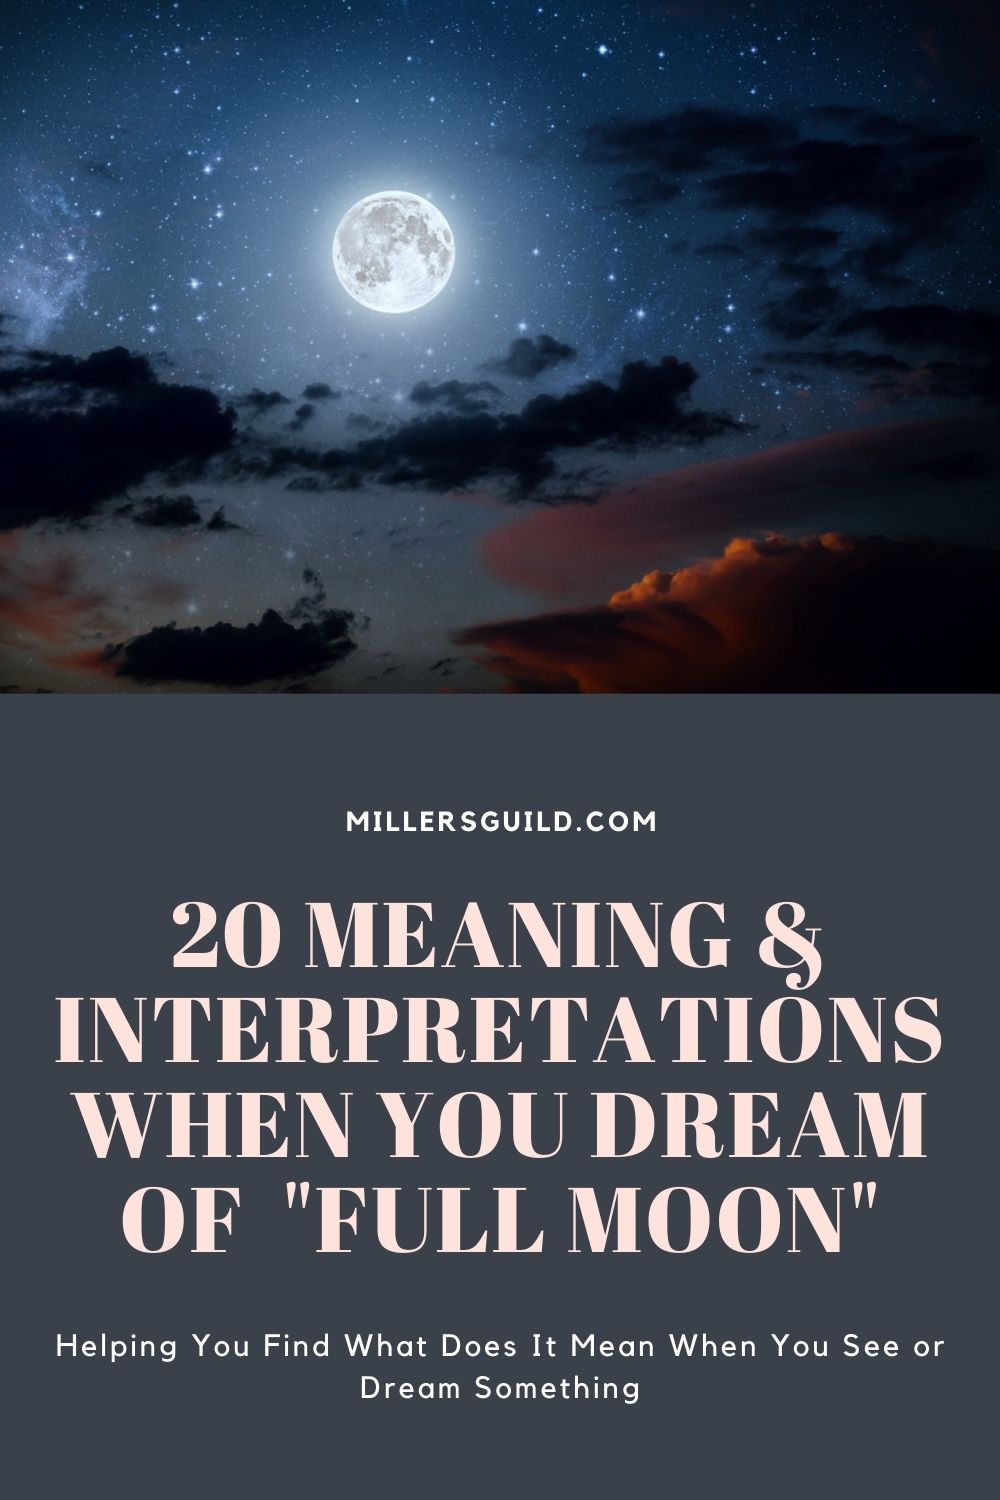 20 Meaning & Interpretations When You Dream of Full Moon 1